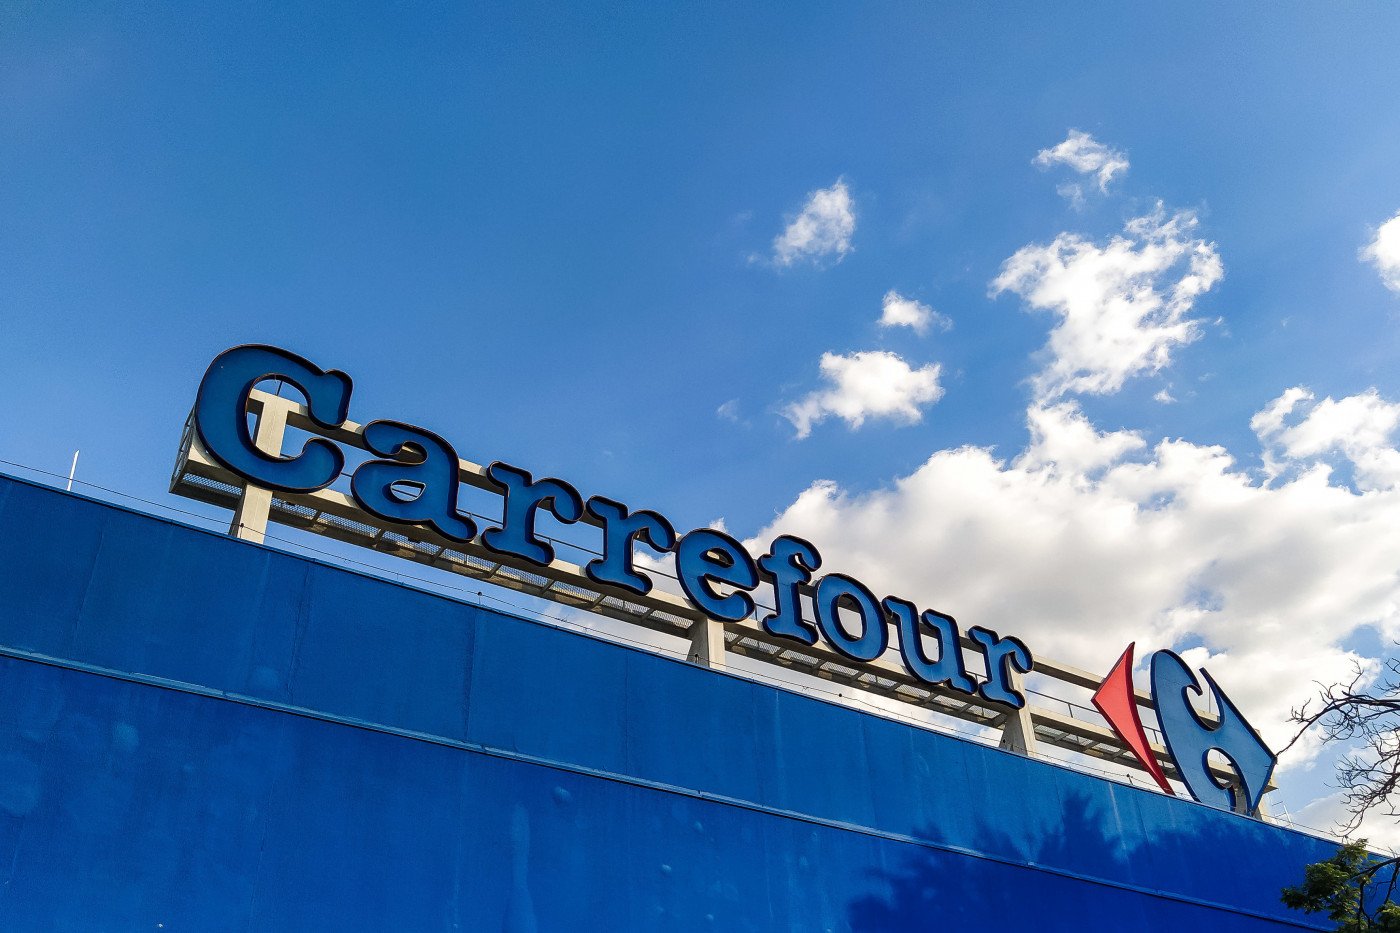 Carrefour S.A. - CRFB3